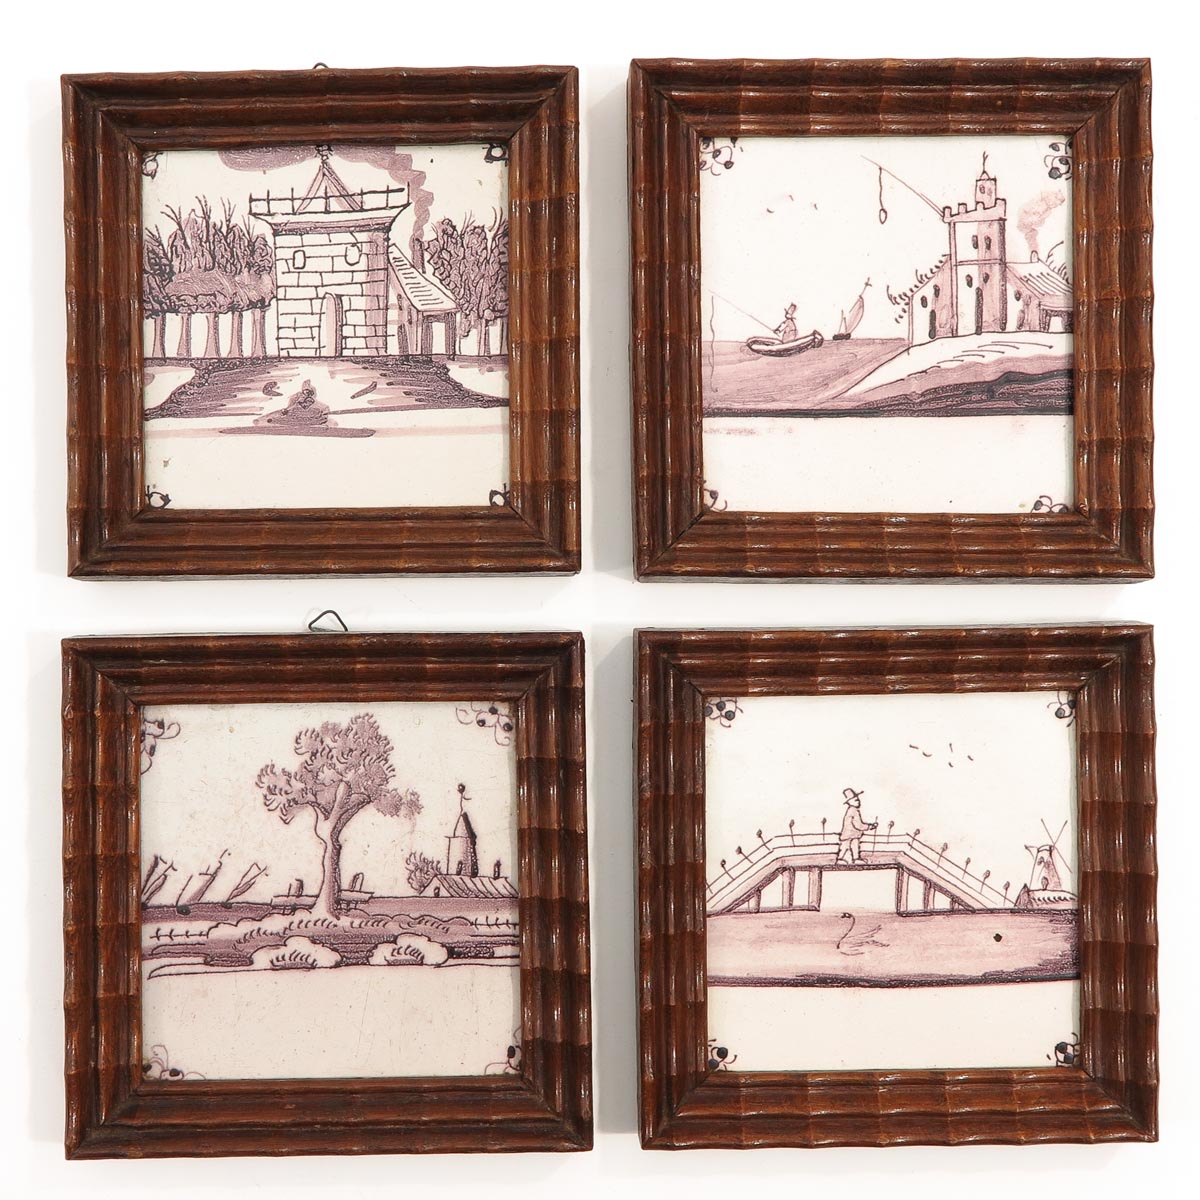 A Collection of Dutch Tiles - Image 5 of 8